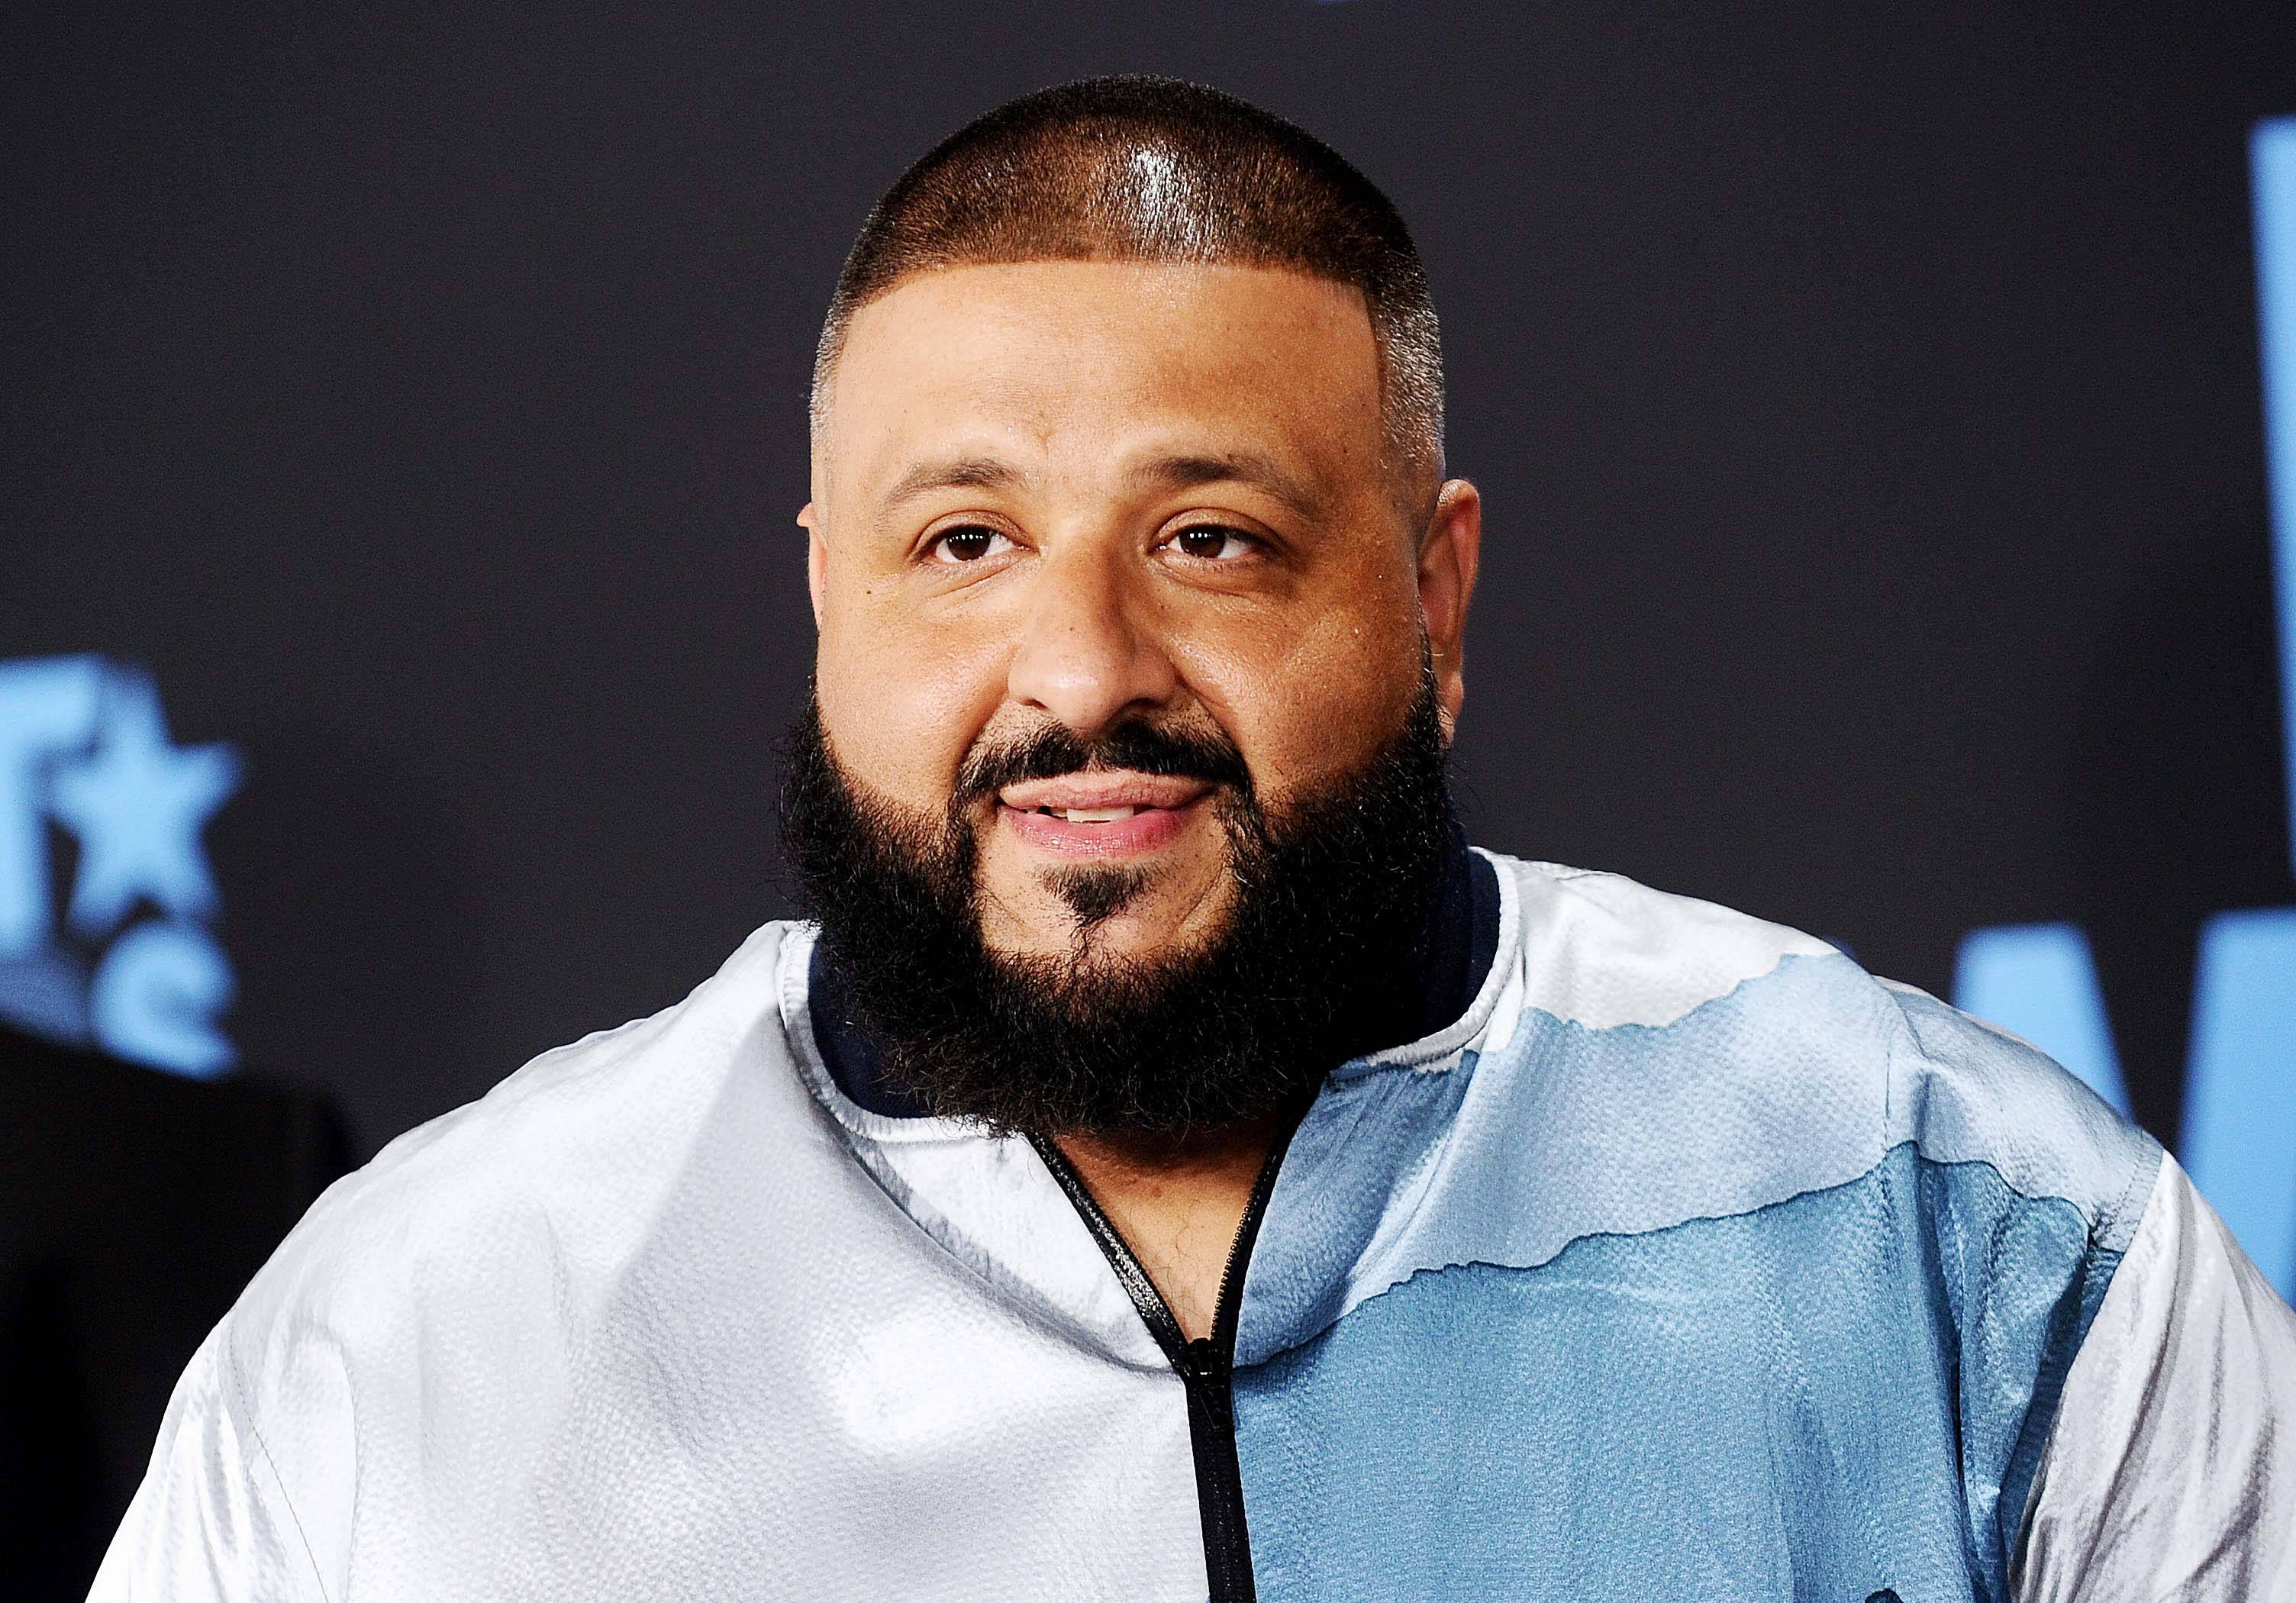 OMG: This DJ Khaled Lookalike Is Hilariously Accurate | News | BET